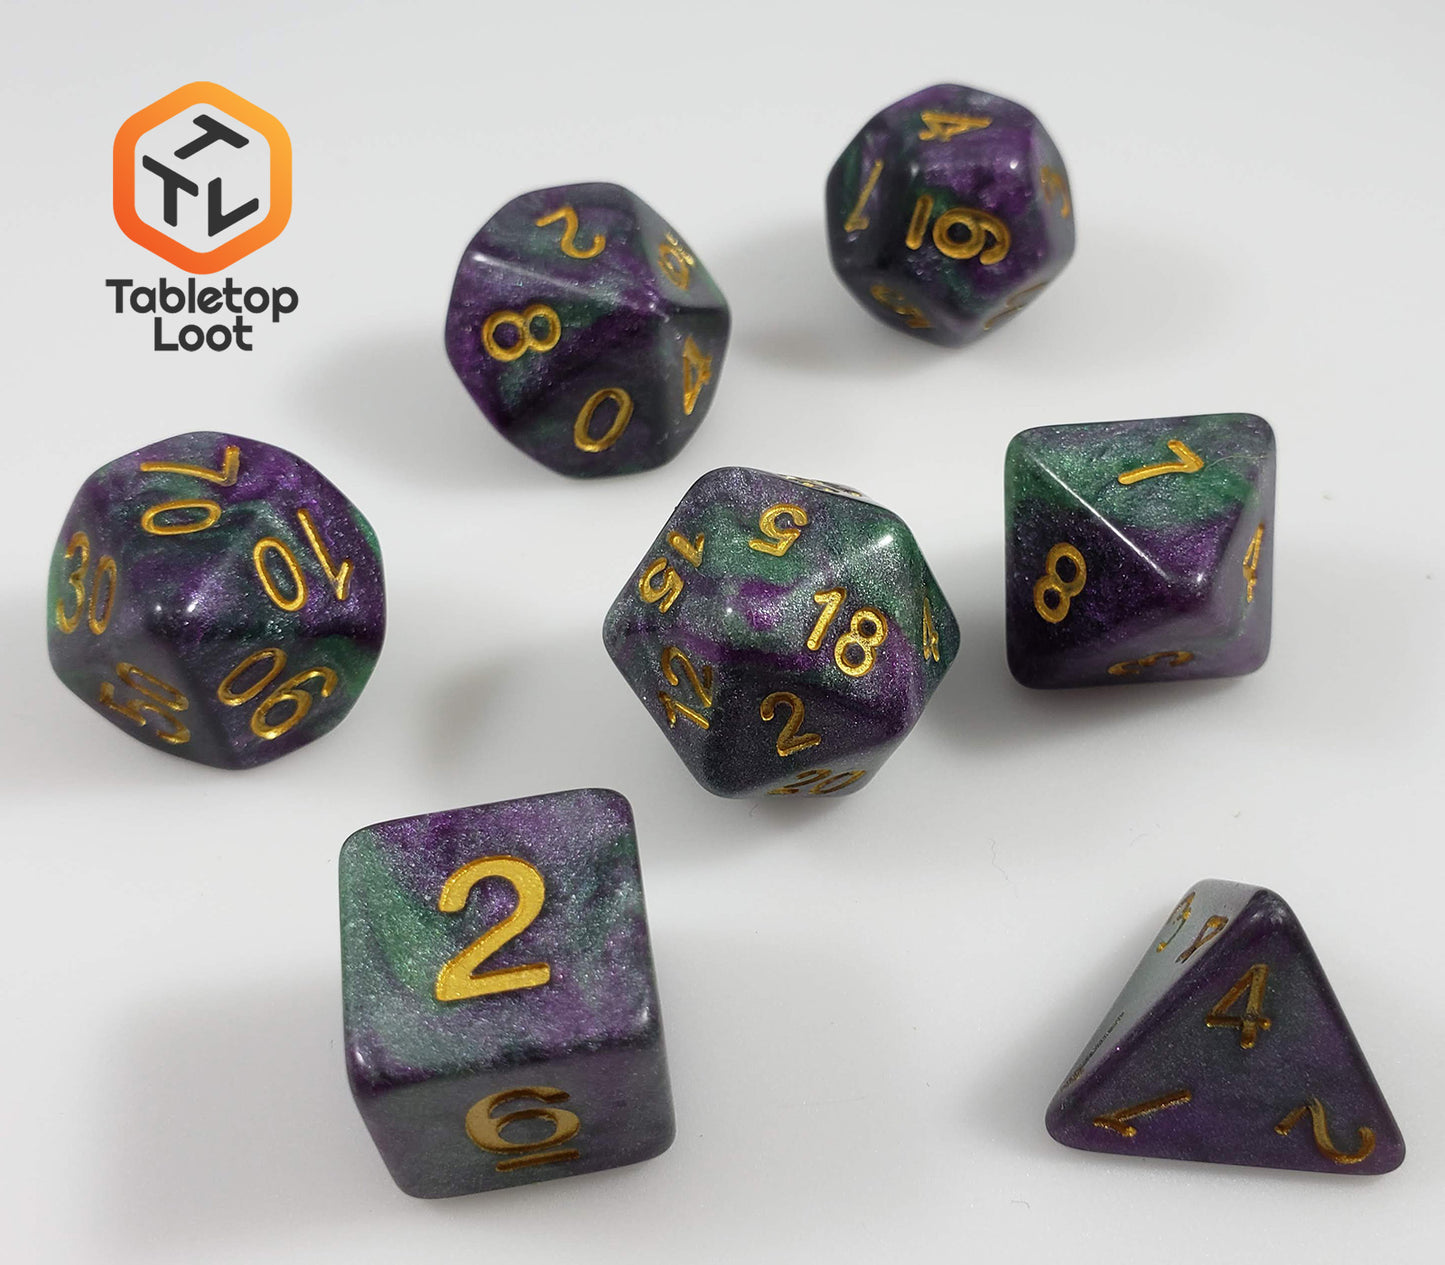 The King Cake 7 piece dice set from Tabletop Loot with swirls of green and purple shimmery resin and gold numbering.